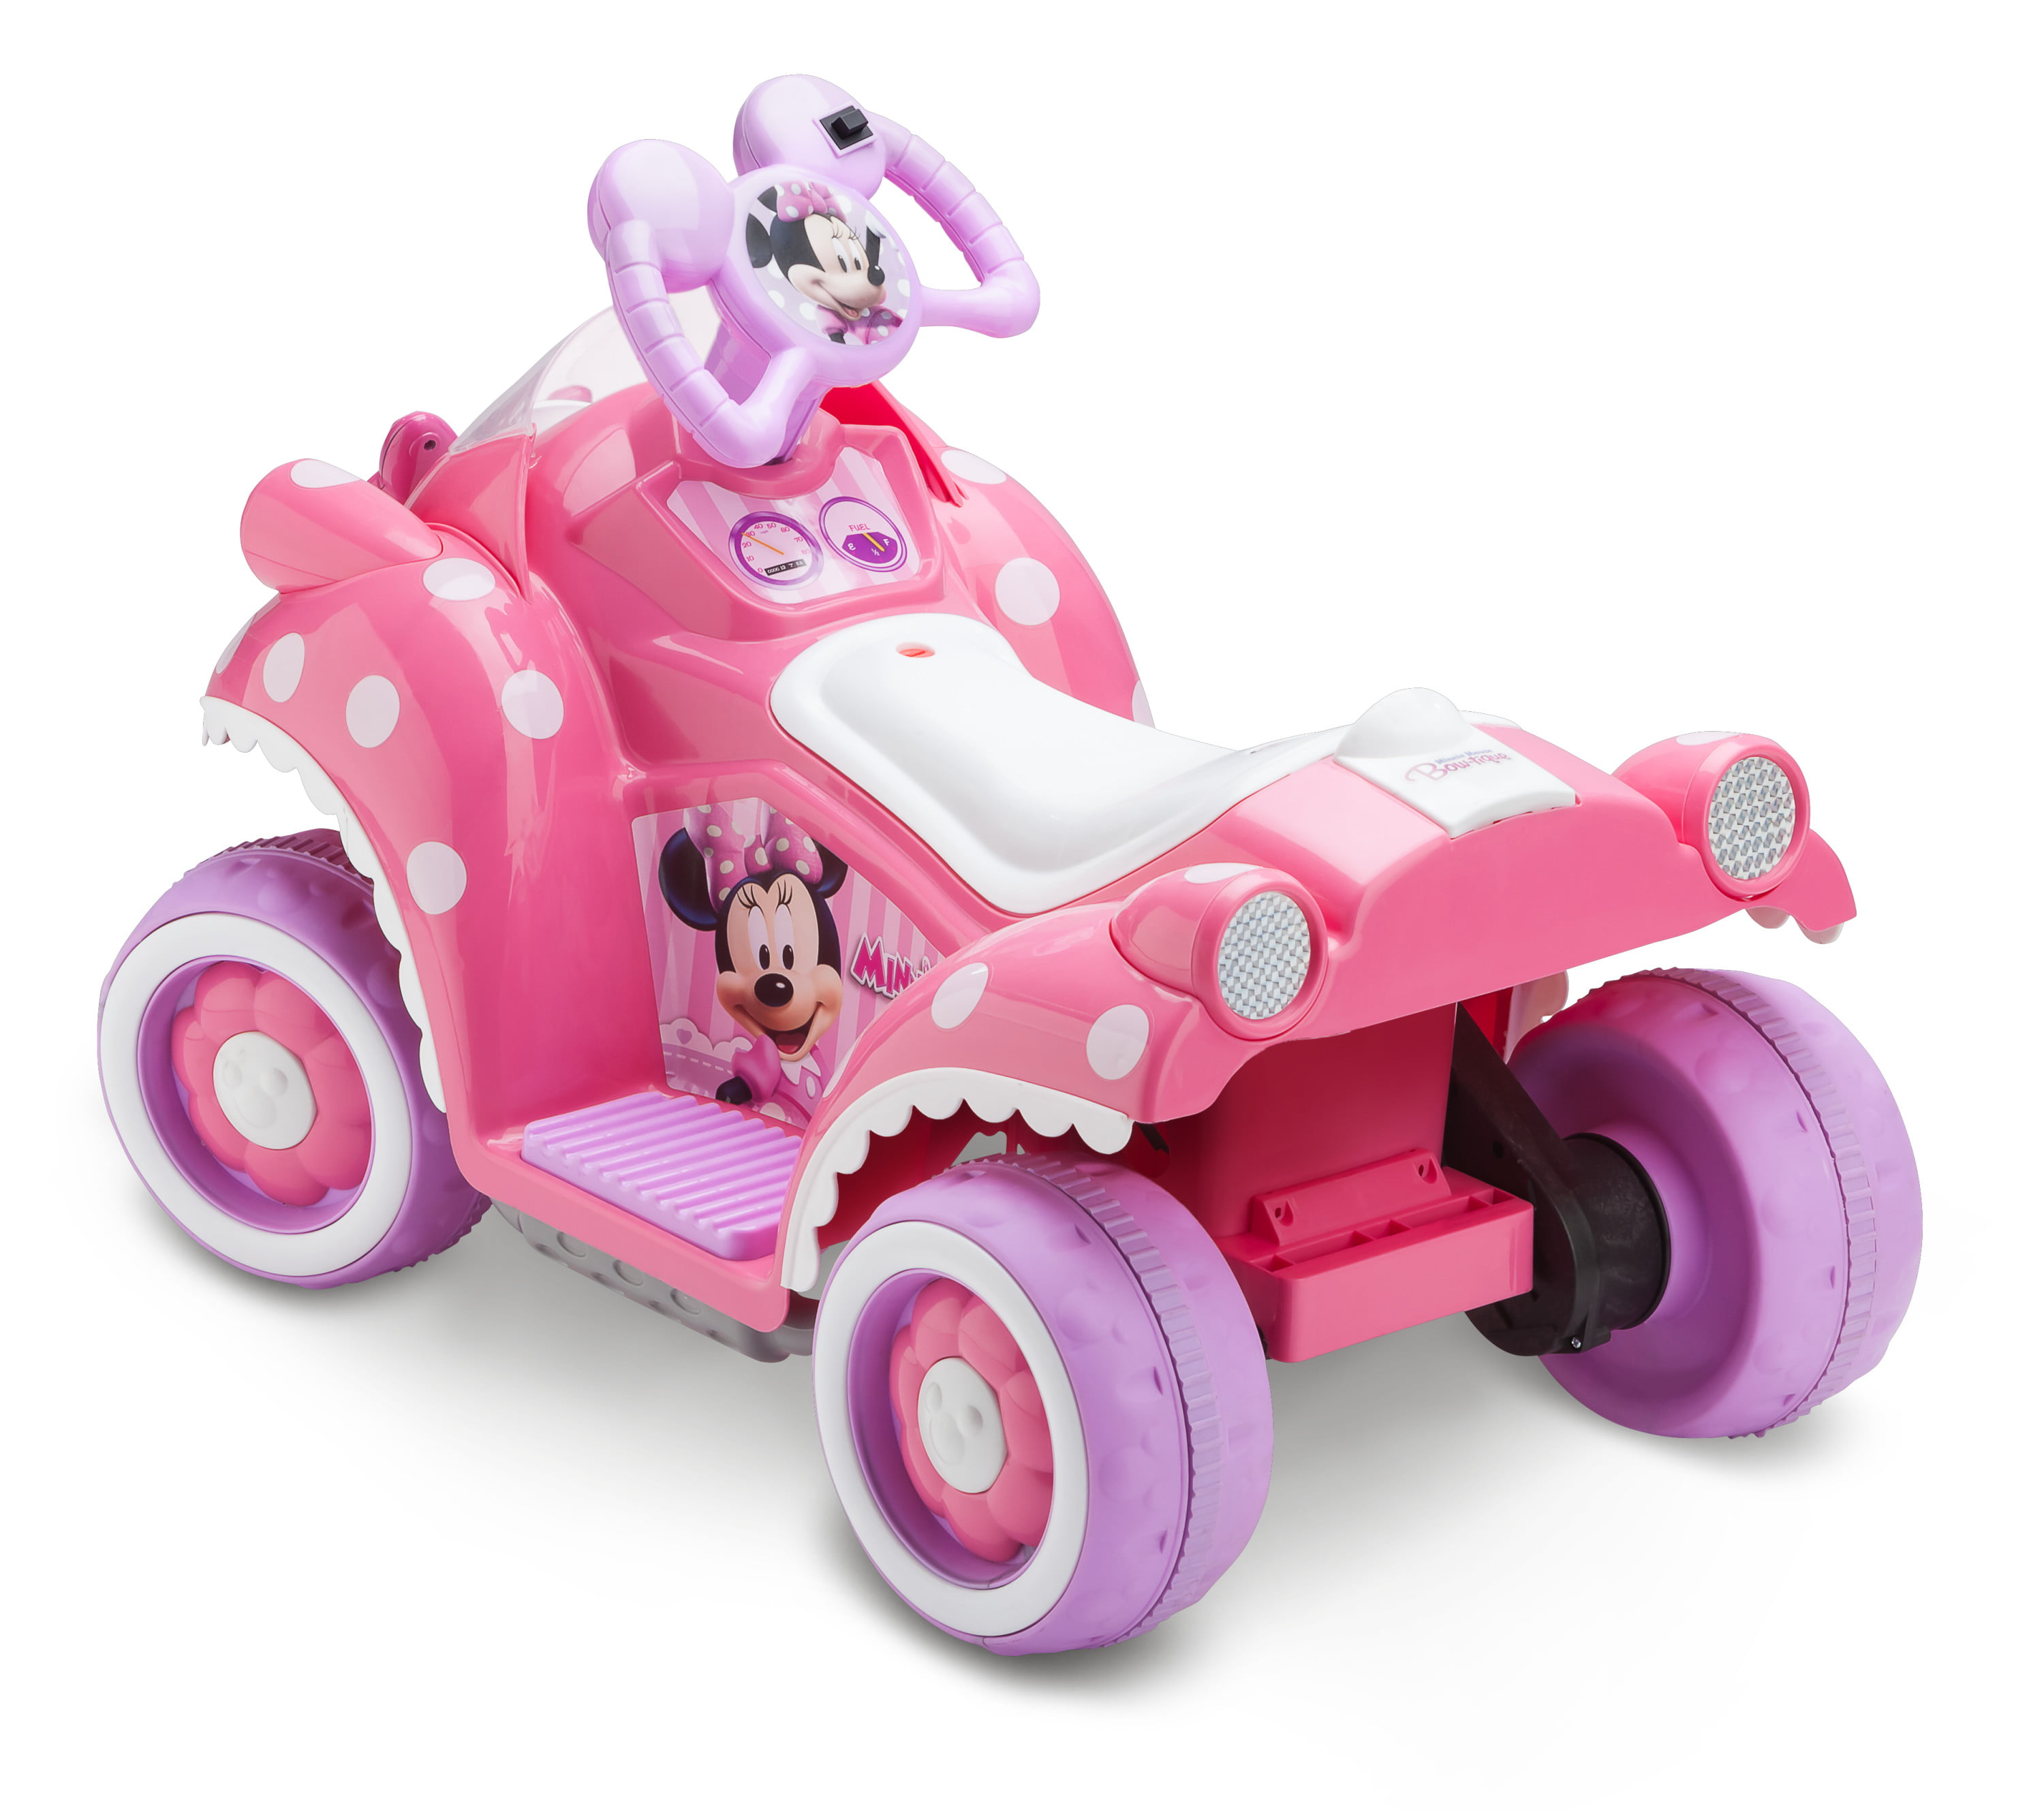 Disney Minnie Mouse Hot Rod Toddler RideOn Toy by Kid